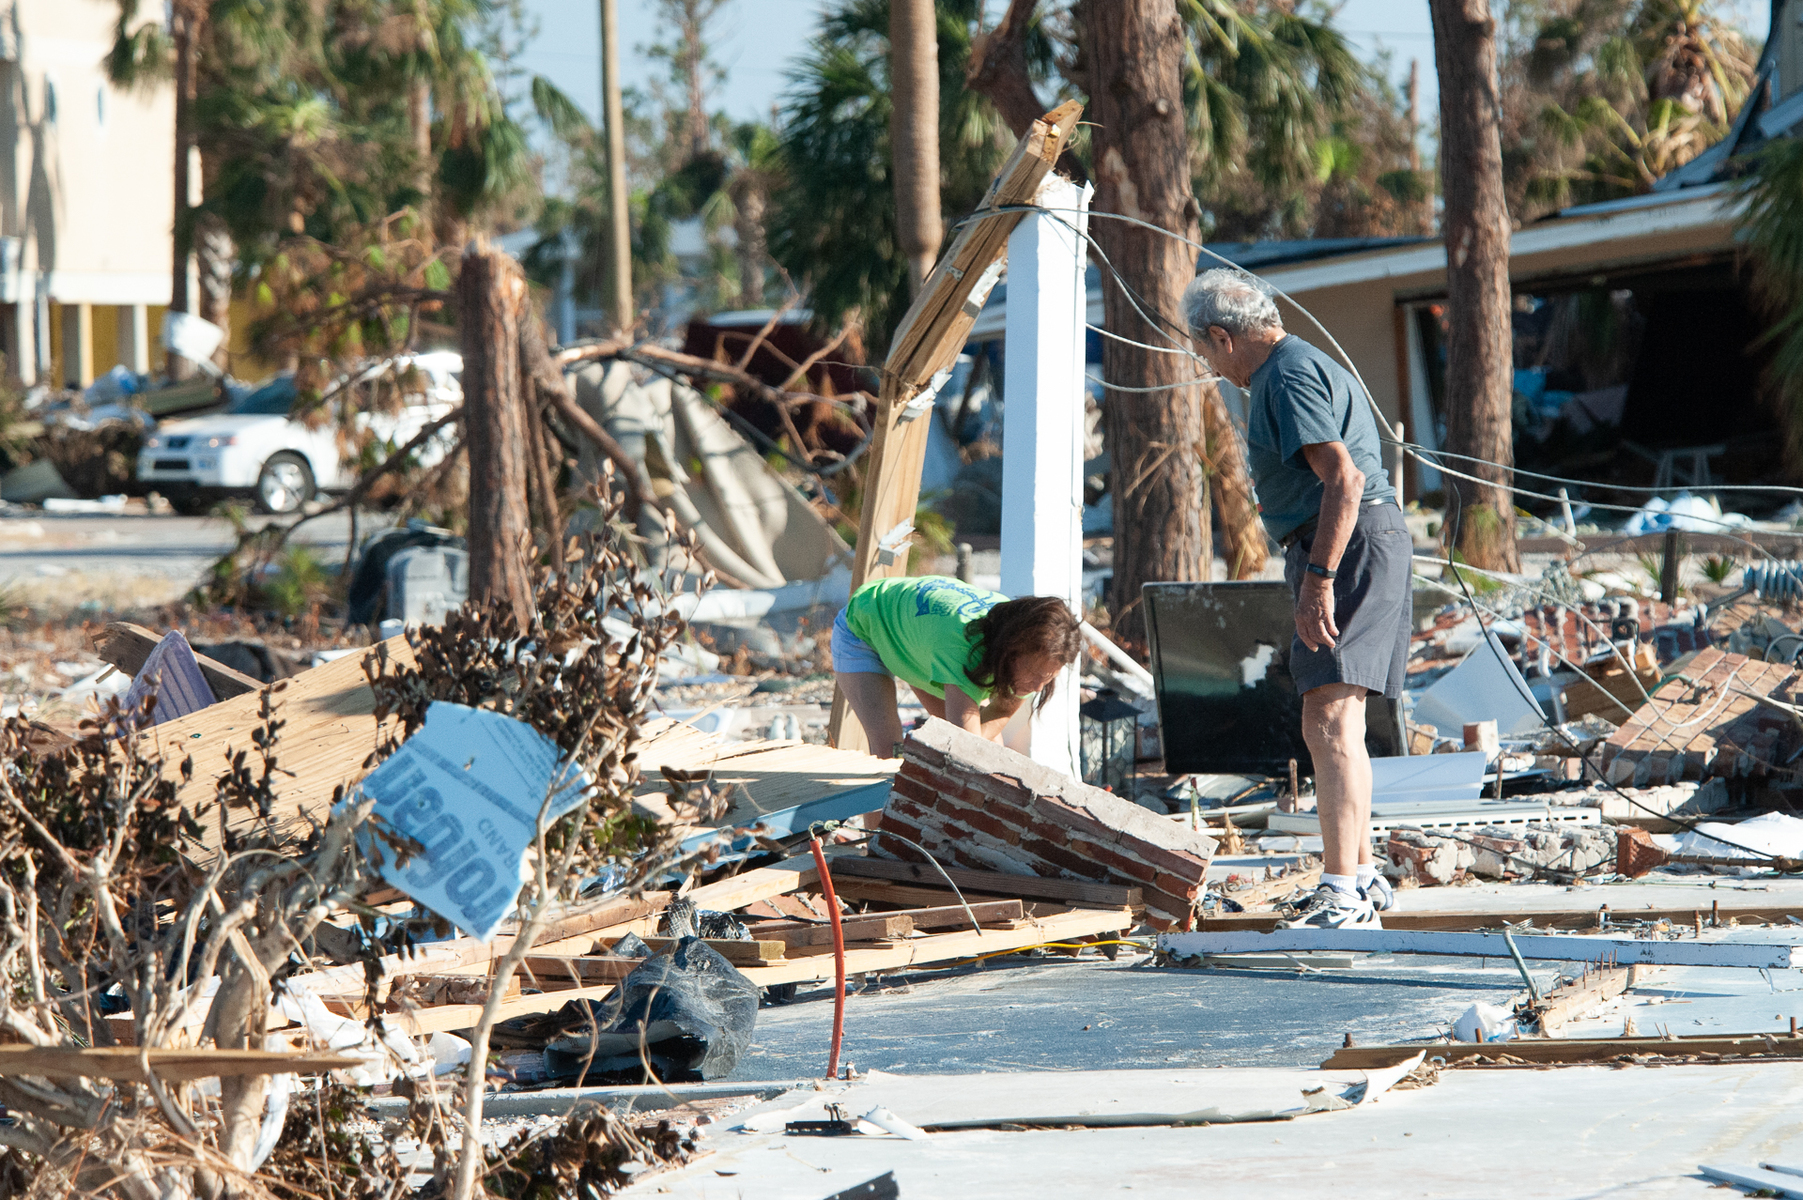 October 18, 2018 - Mexico Beach, FL - George Mamary and his daugther Adlette of Atlanta, GA  survey's what is left of their vacation home in Mexico Beach, Florida after Hurricane Michael as passed through the area on October 15, 2018 in Mexico Beach, Florida.  The hurricane hit the Florida Panhandle as a category 5 storm causing massive damage and claimed the lives of more then a dozen people.